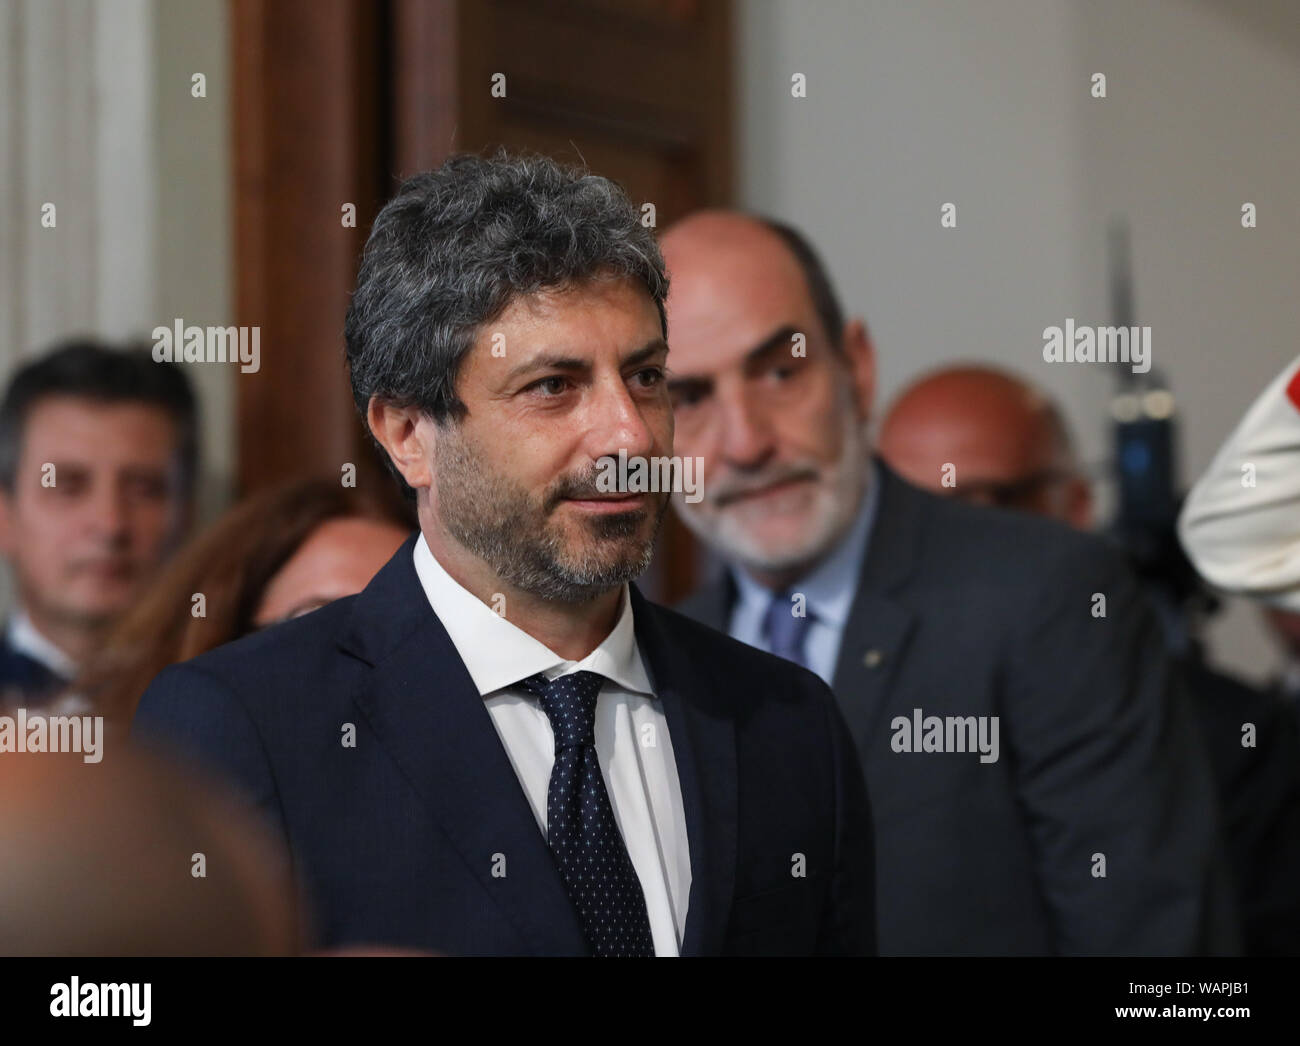 Rome, Italy. 21st Aug, 2019. Roberto Fico, president of the Italian Chamber of Deputies, arrives at Palazzo del Quirinale to talk with Italian president Sergio Mattarella in Rome, Italy, on Aug. 21, 2019. Italian President Sergio Mattarella began talks with political parties on Wednesday, a day after Prime Minister Giuseppe Conte's populist government collapsed. Credit: Cheng Tingting/Xinhua/Alamy Live News Stock Photo